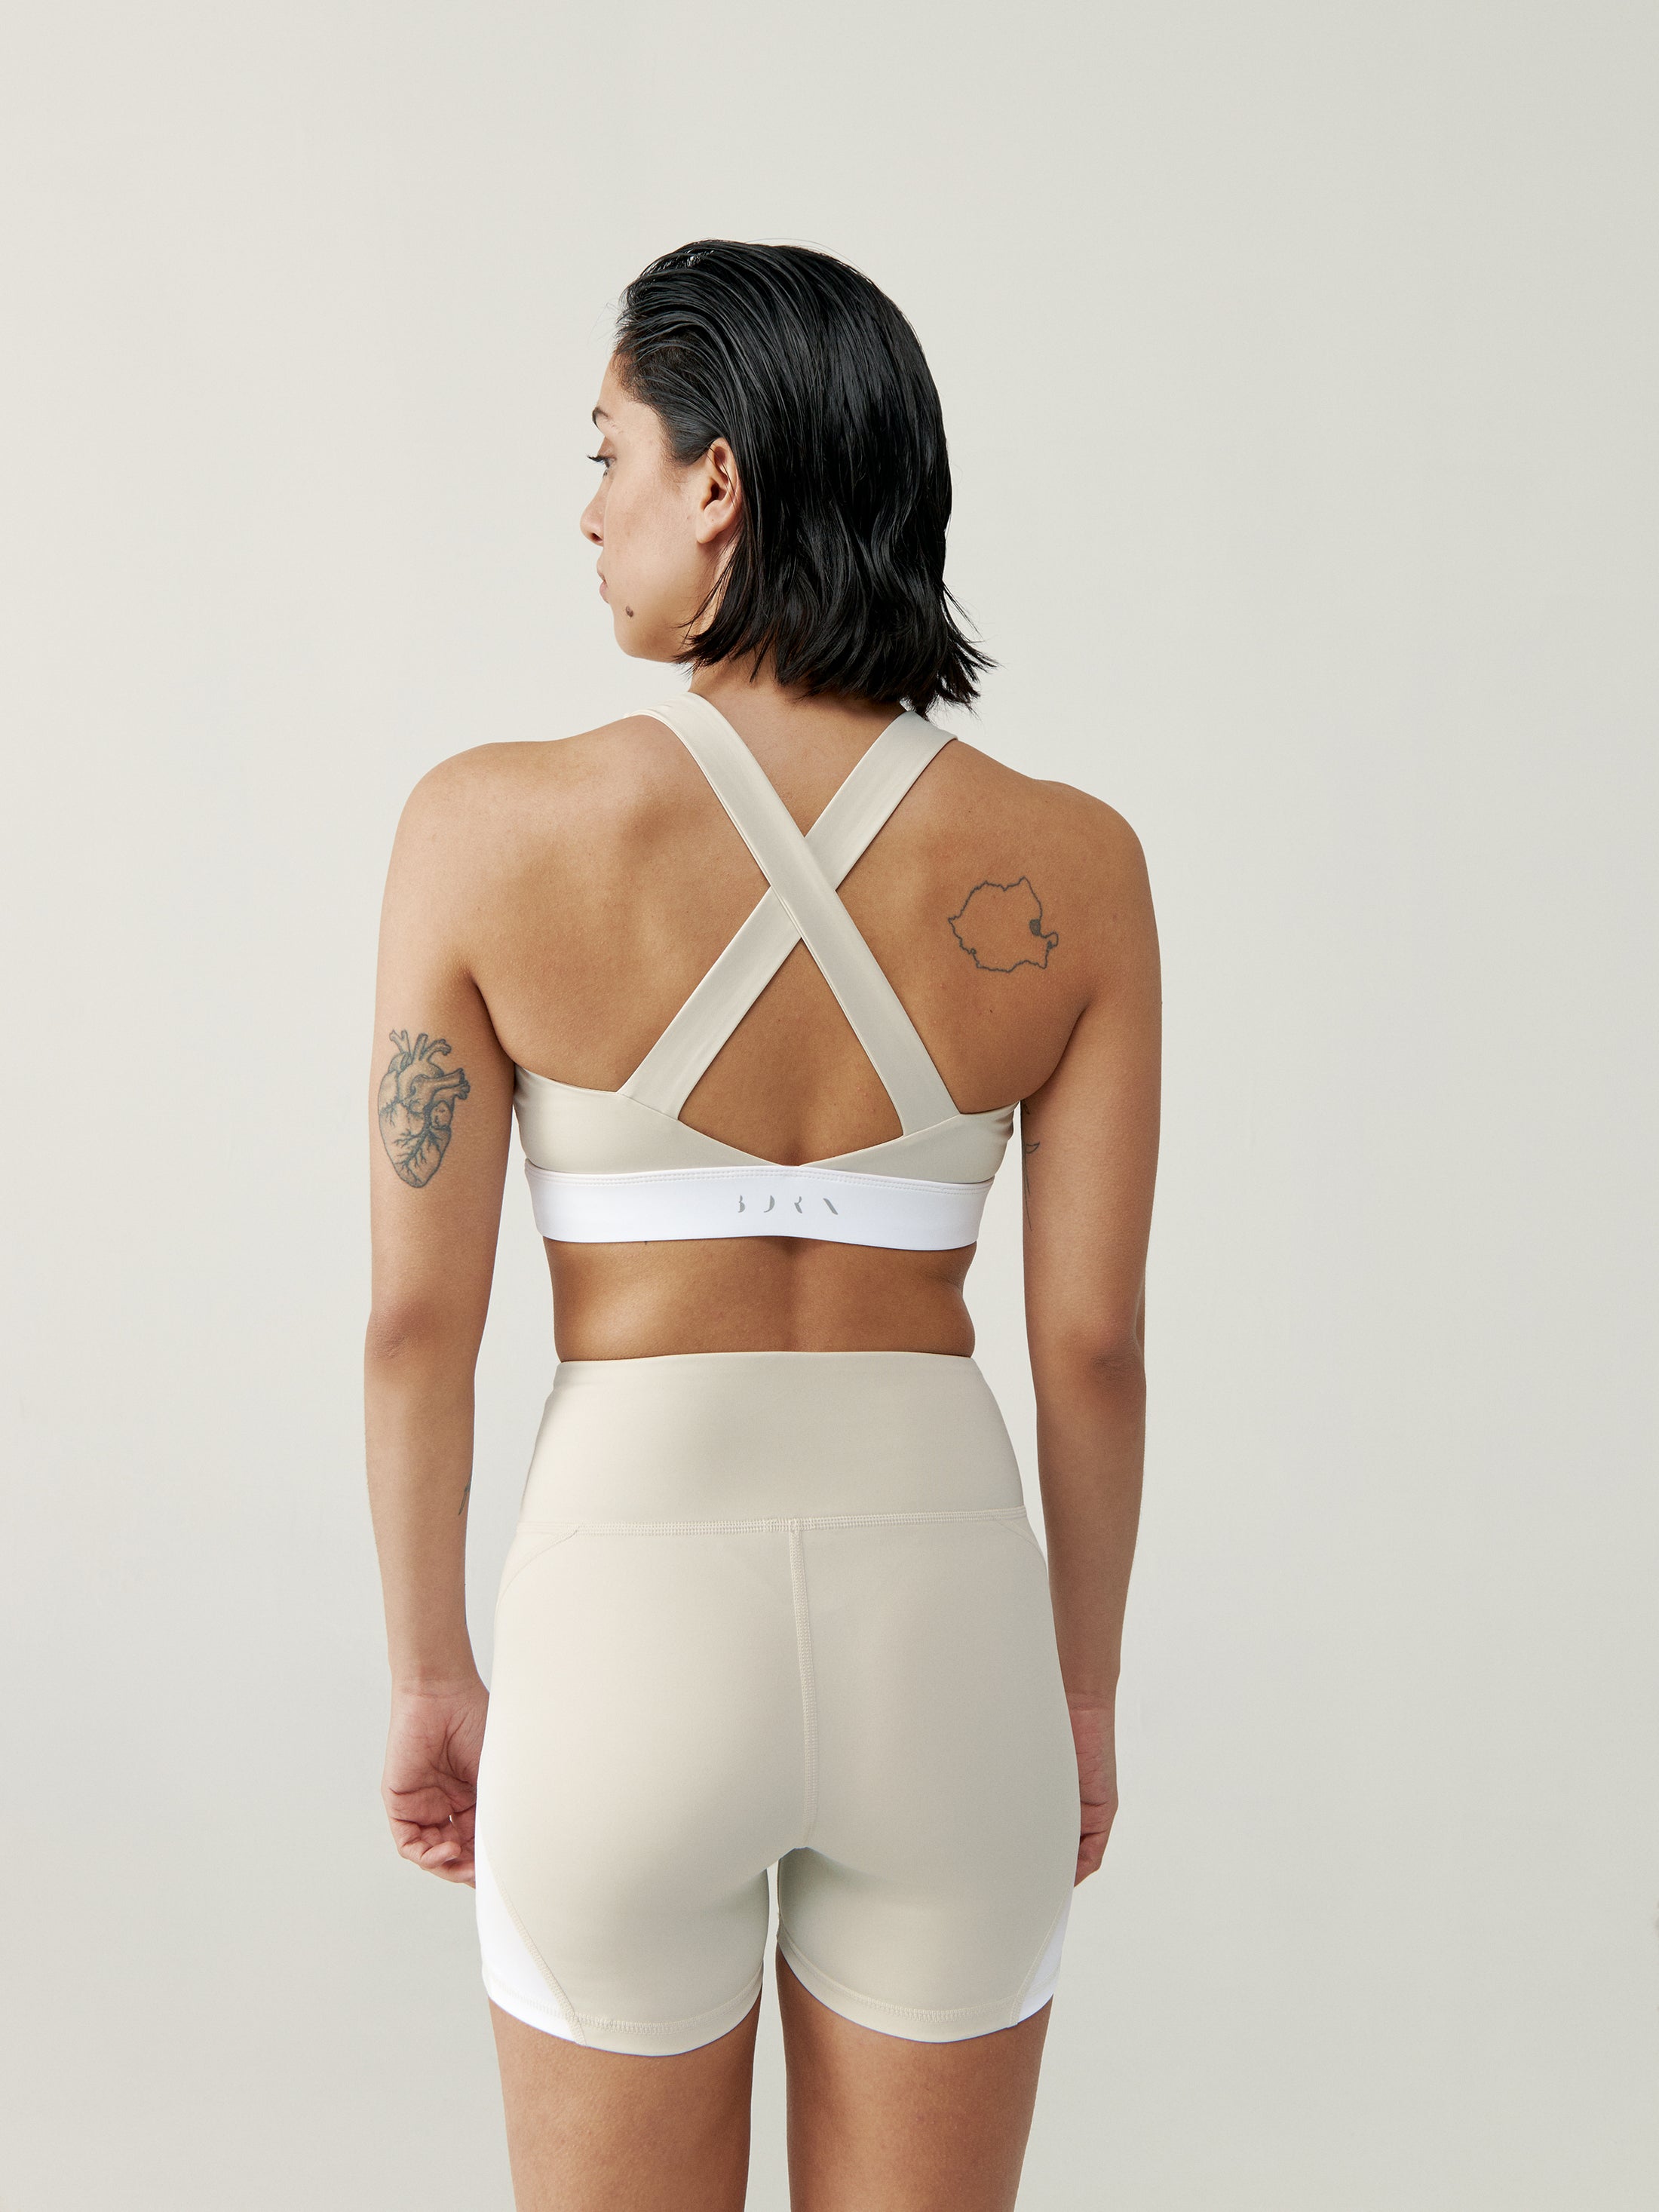 Layna Top in Light Stone/White